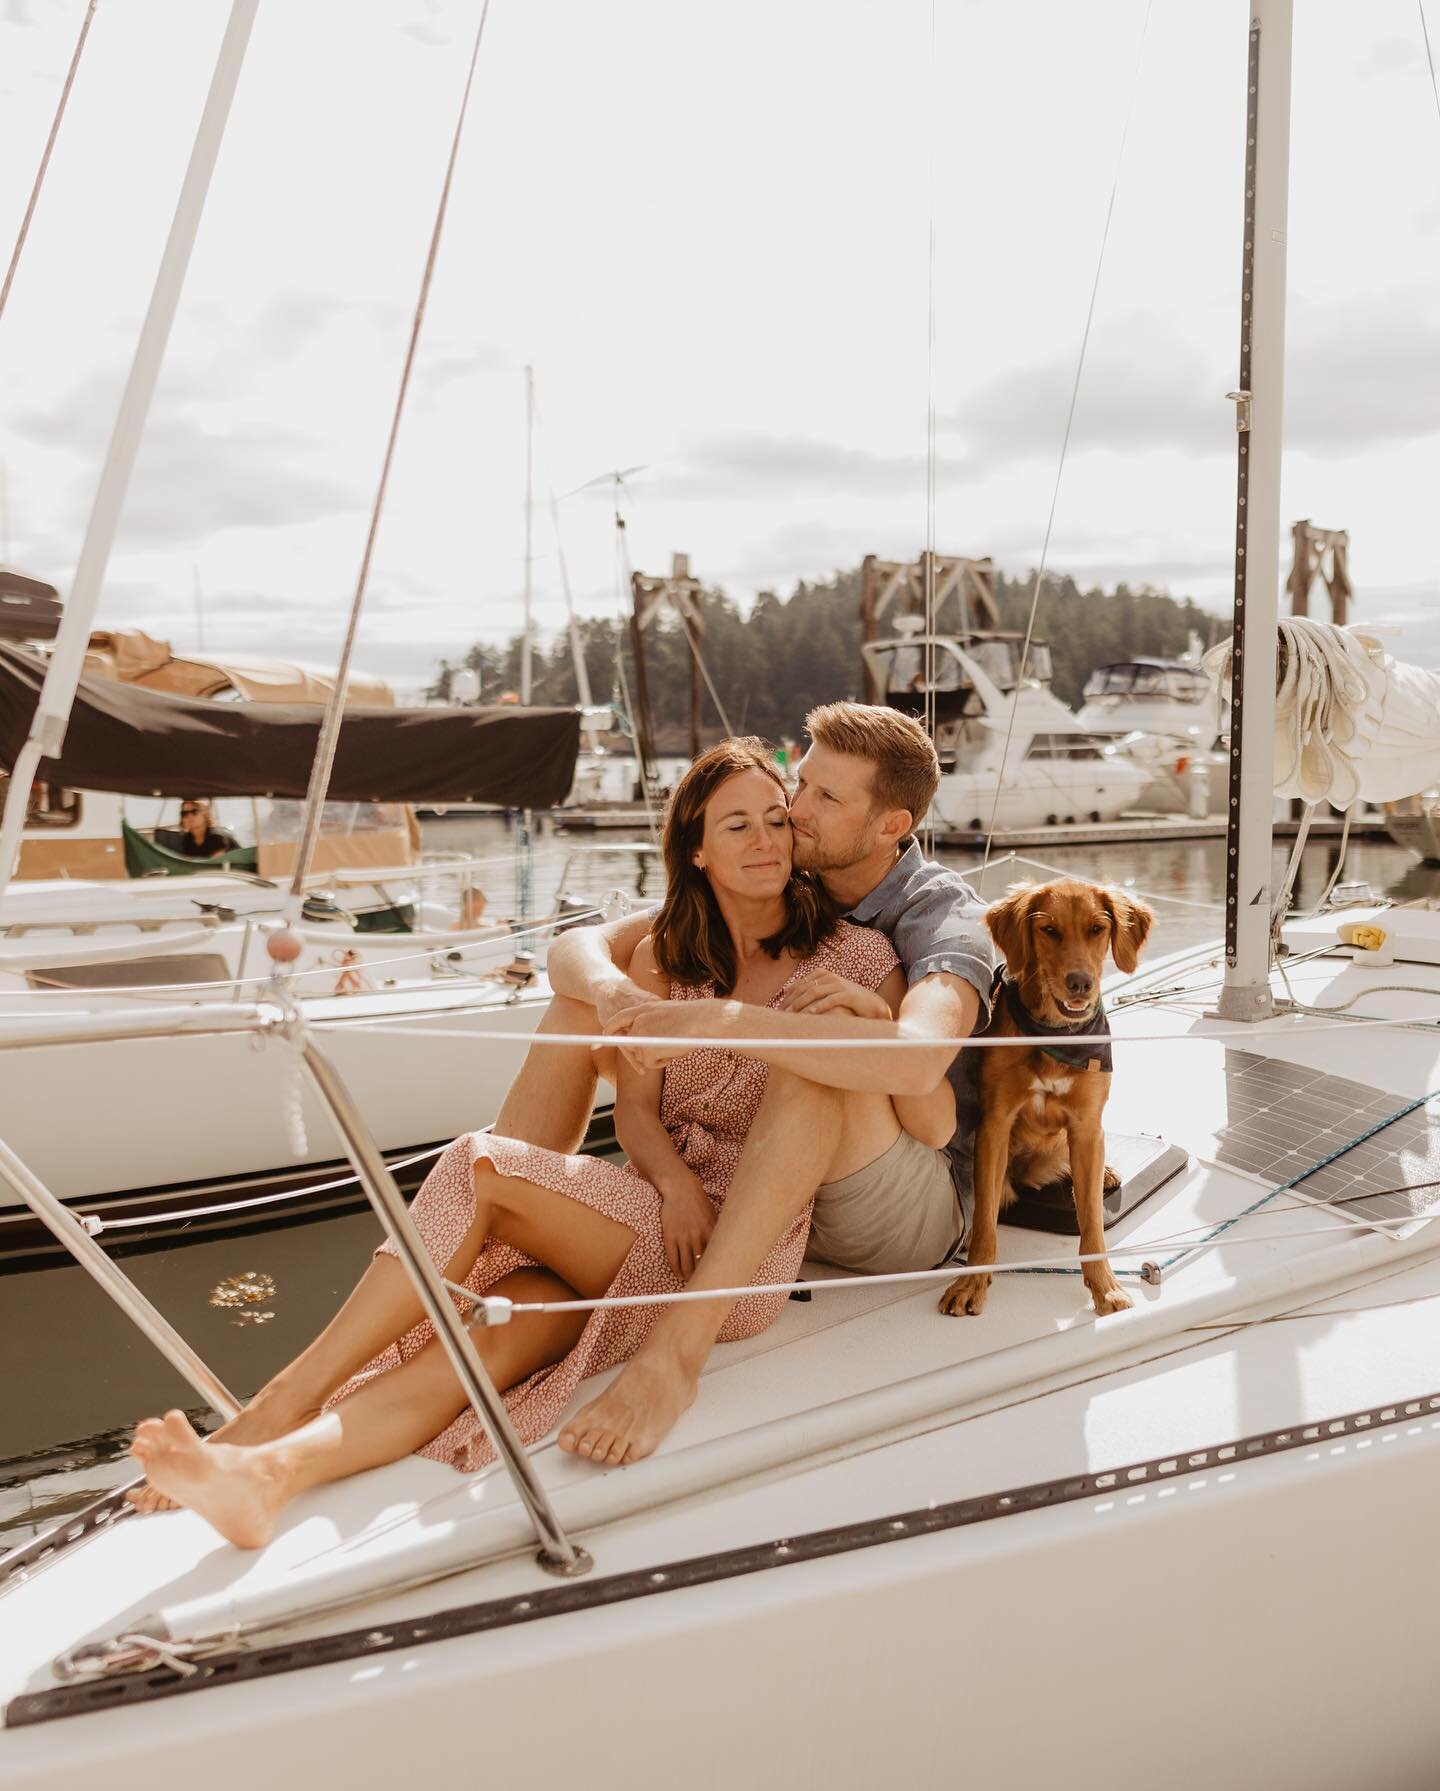 When the sweetest, raddest couple reaches out to take photos on their incredibly beautiful boat🥹🤍 You say yes.

#sanjuanisland #washingtonphotographer #washingtonwedding #washingtonweddingphotographer #travelphotographer